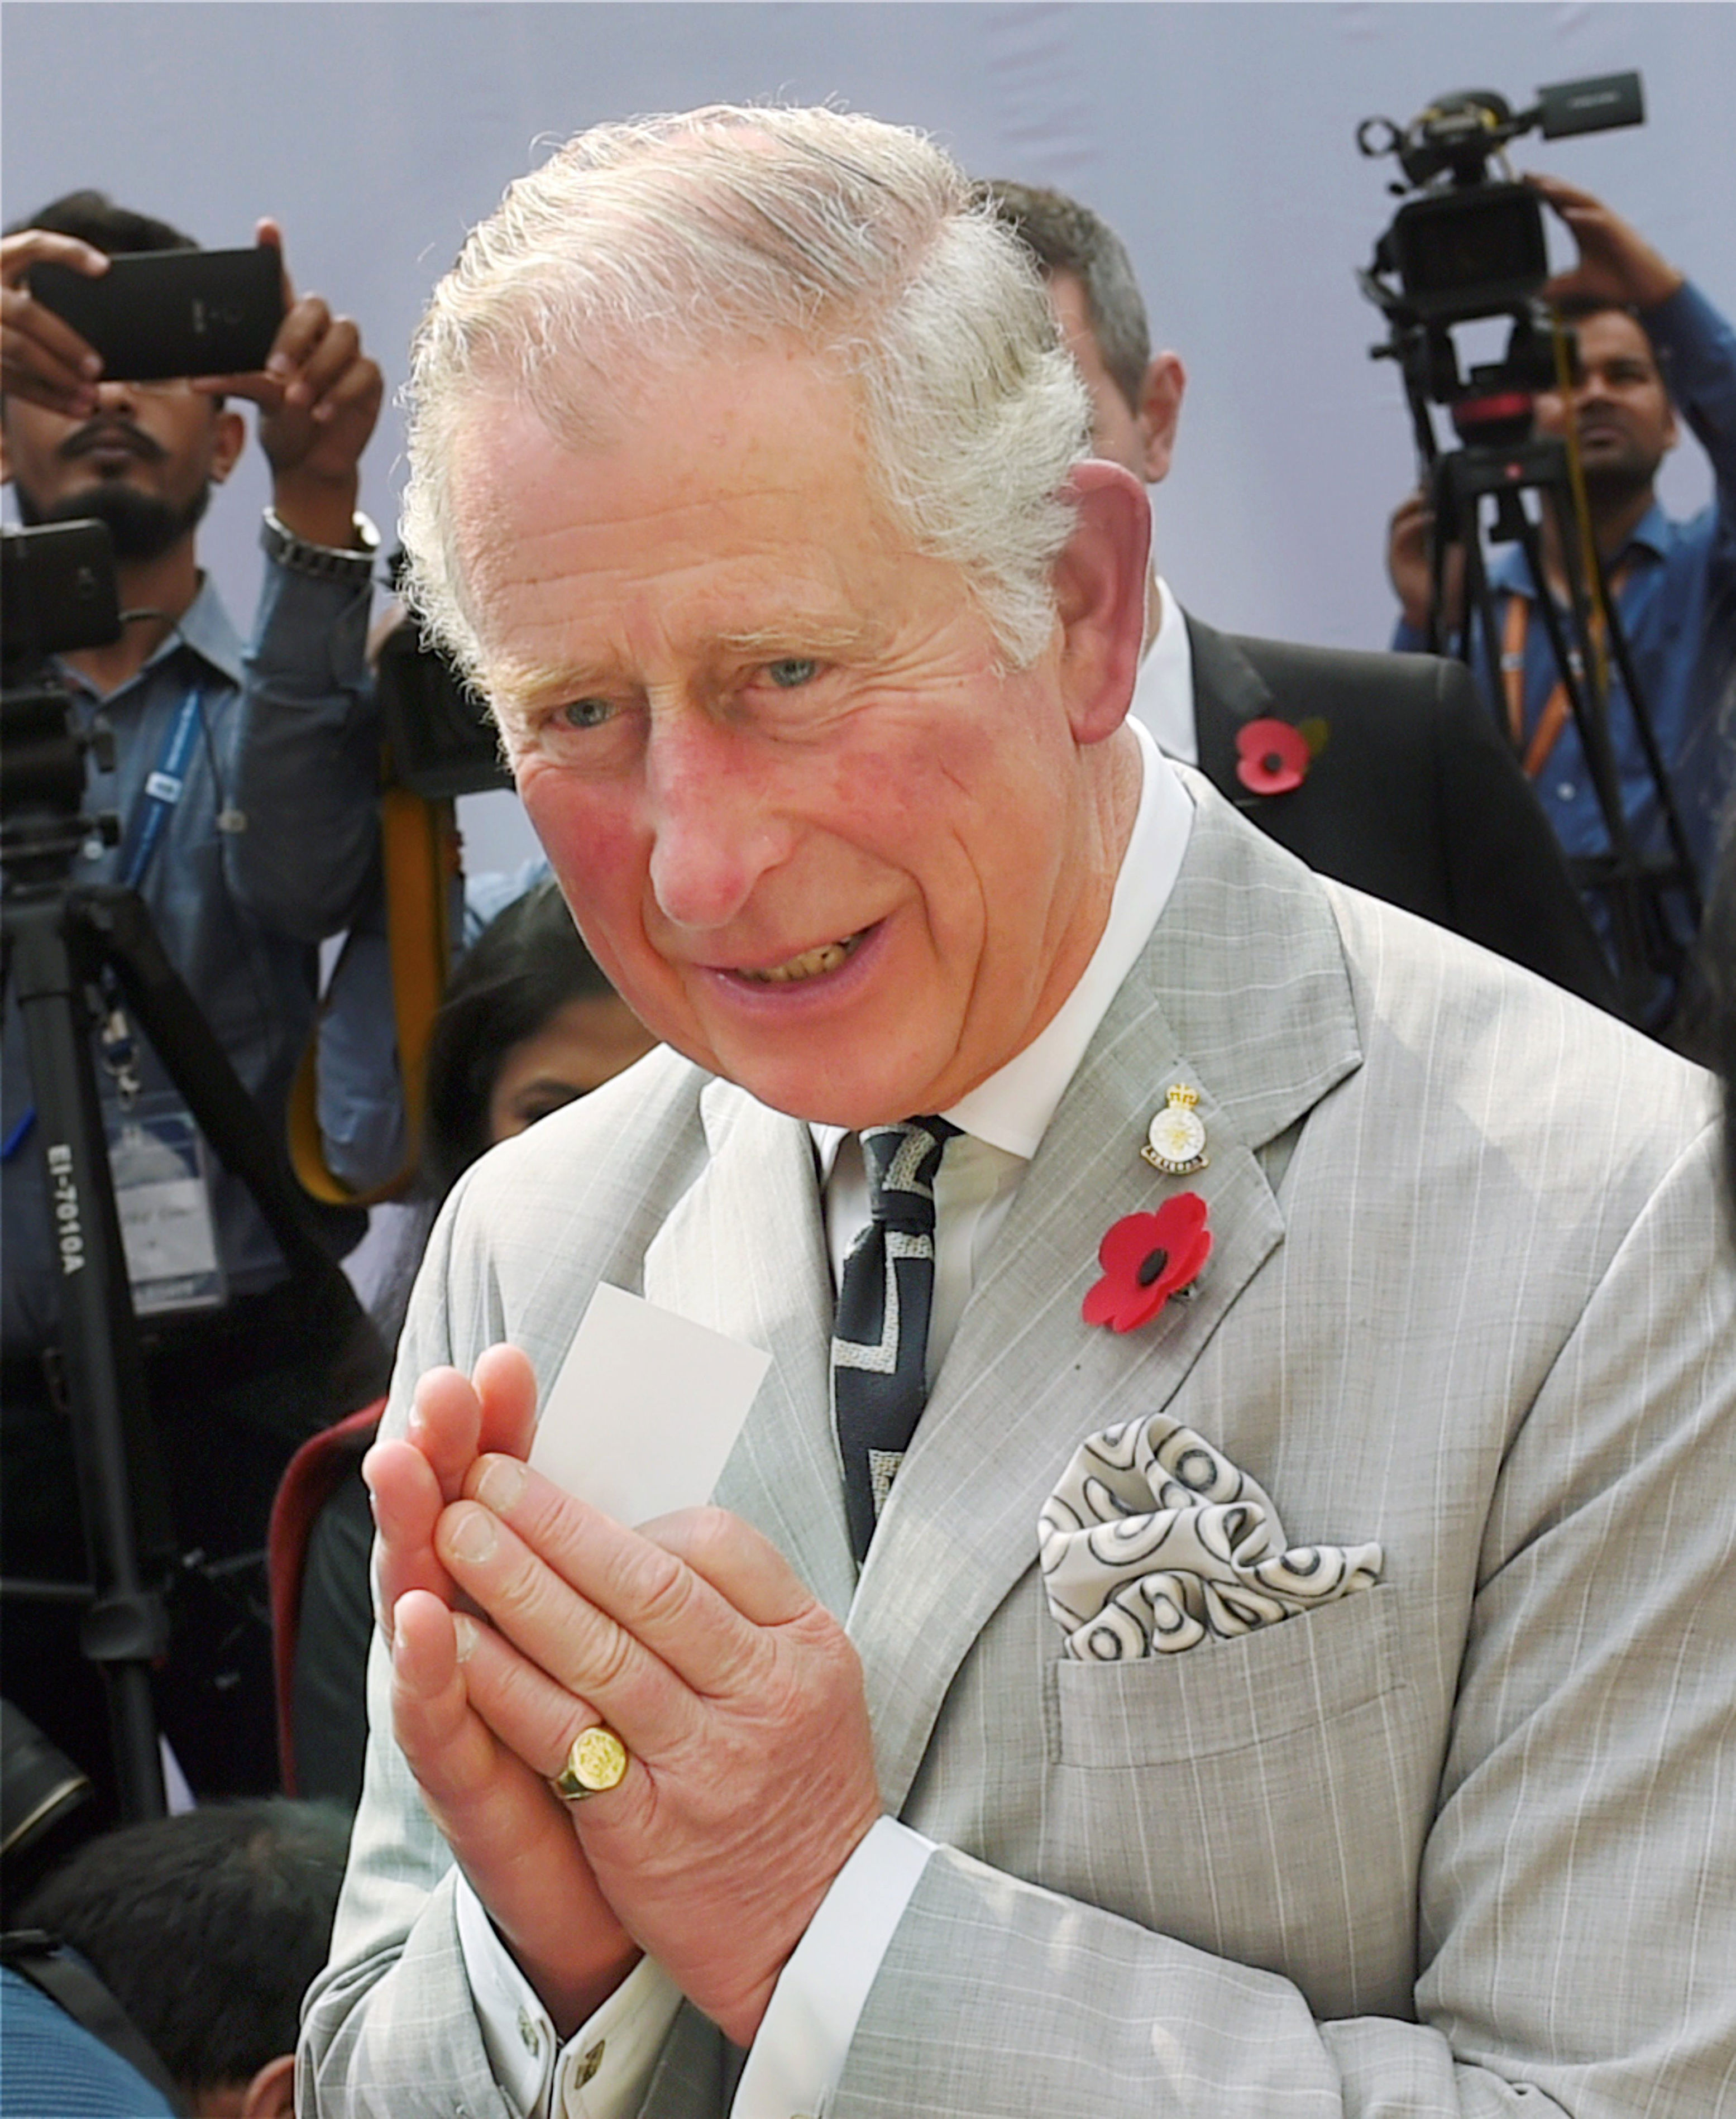 king charles thanks public for support after cancer diagnosis